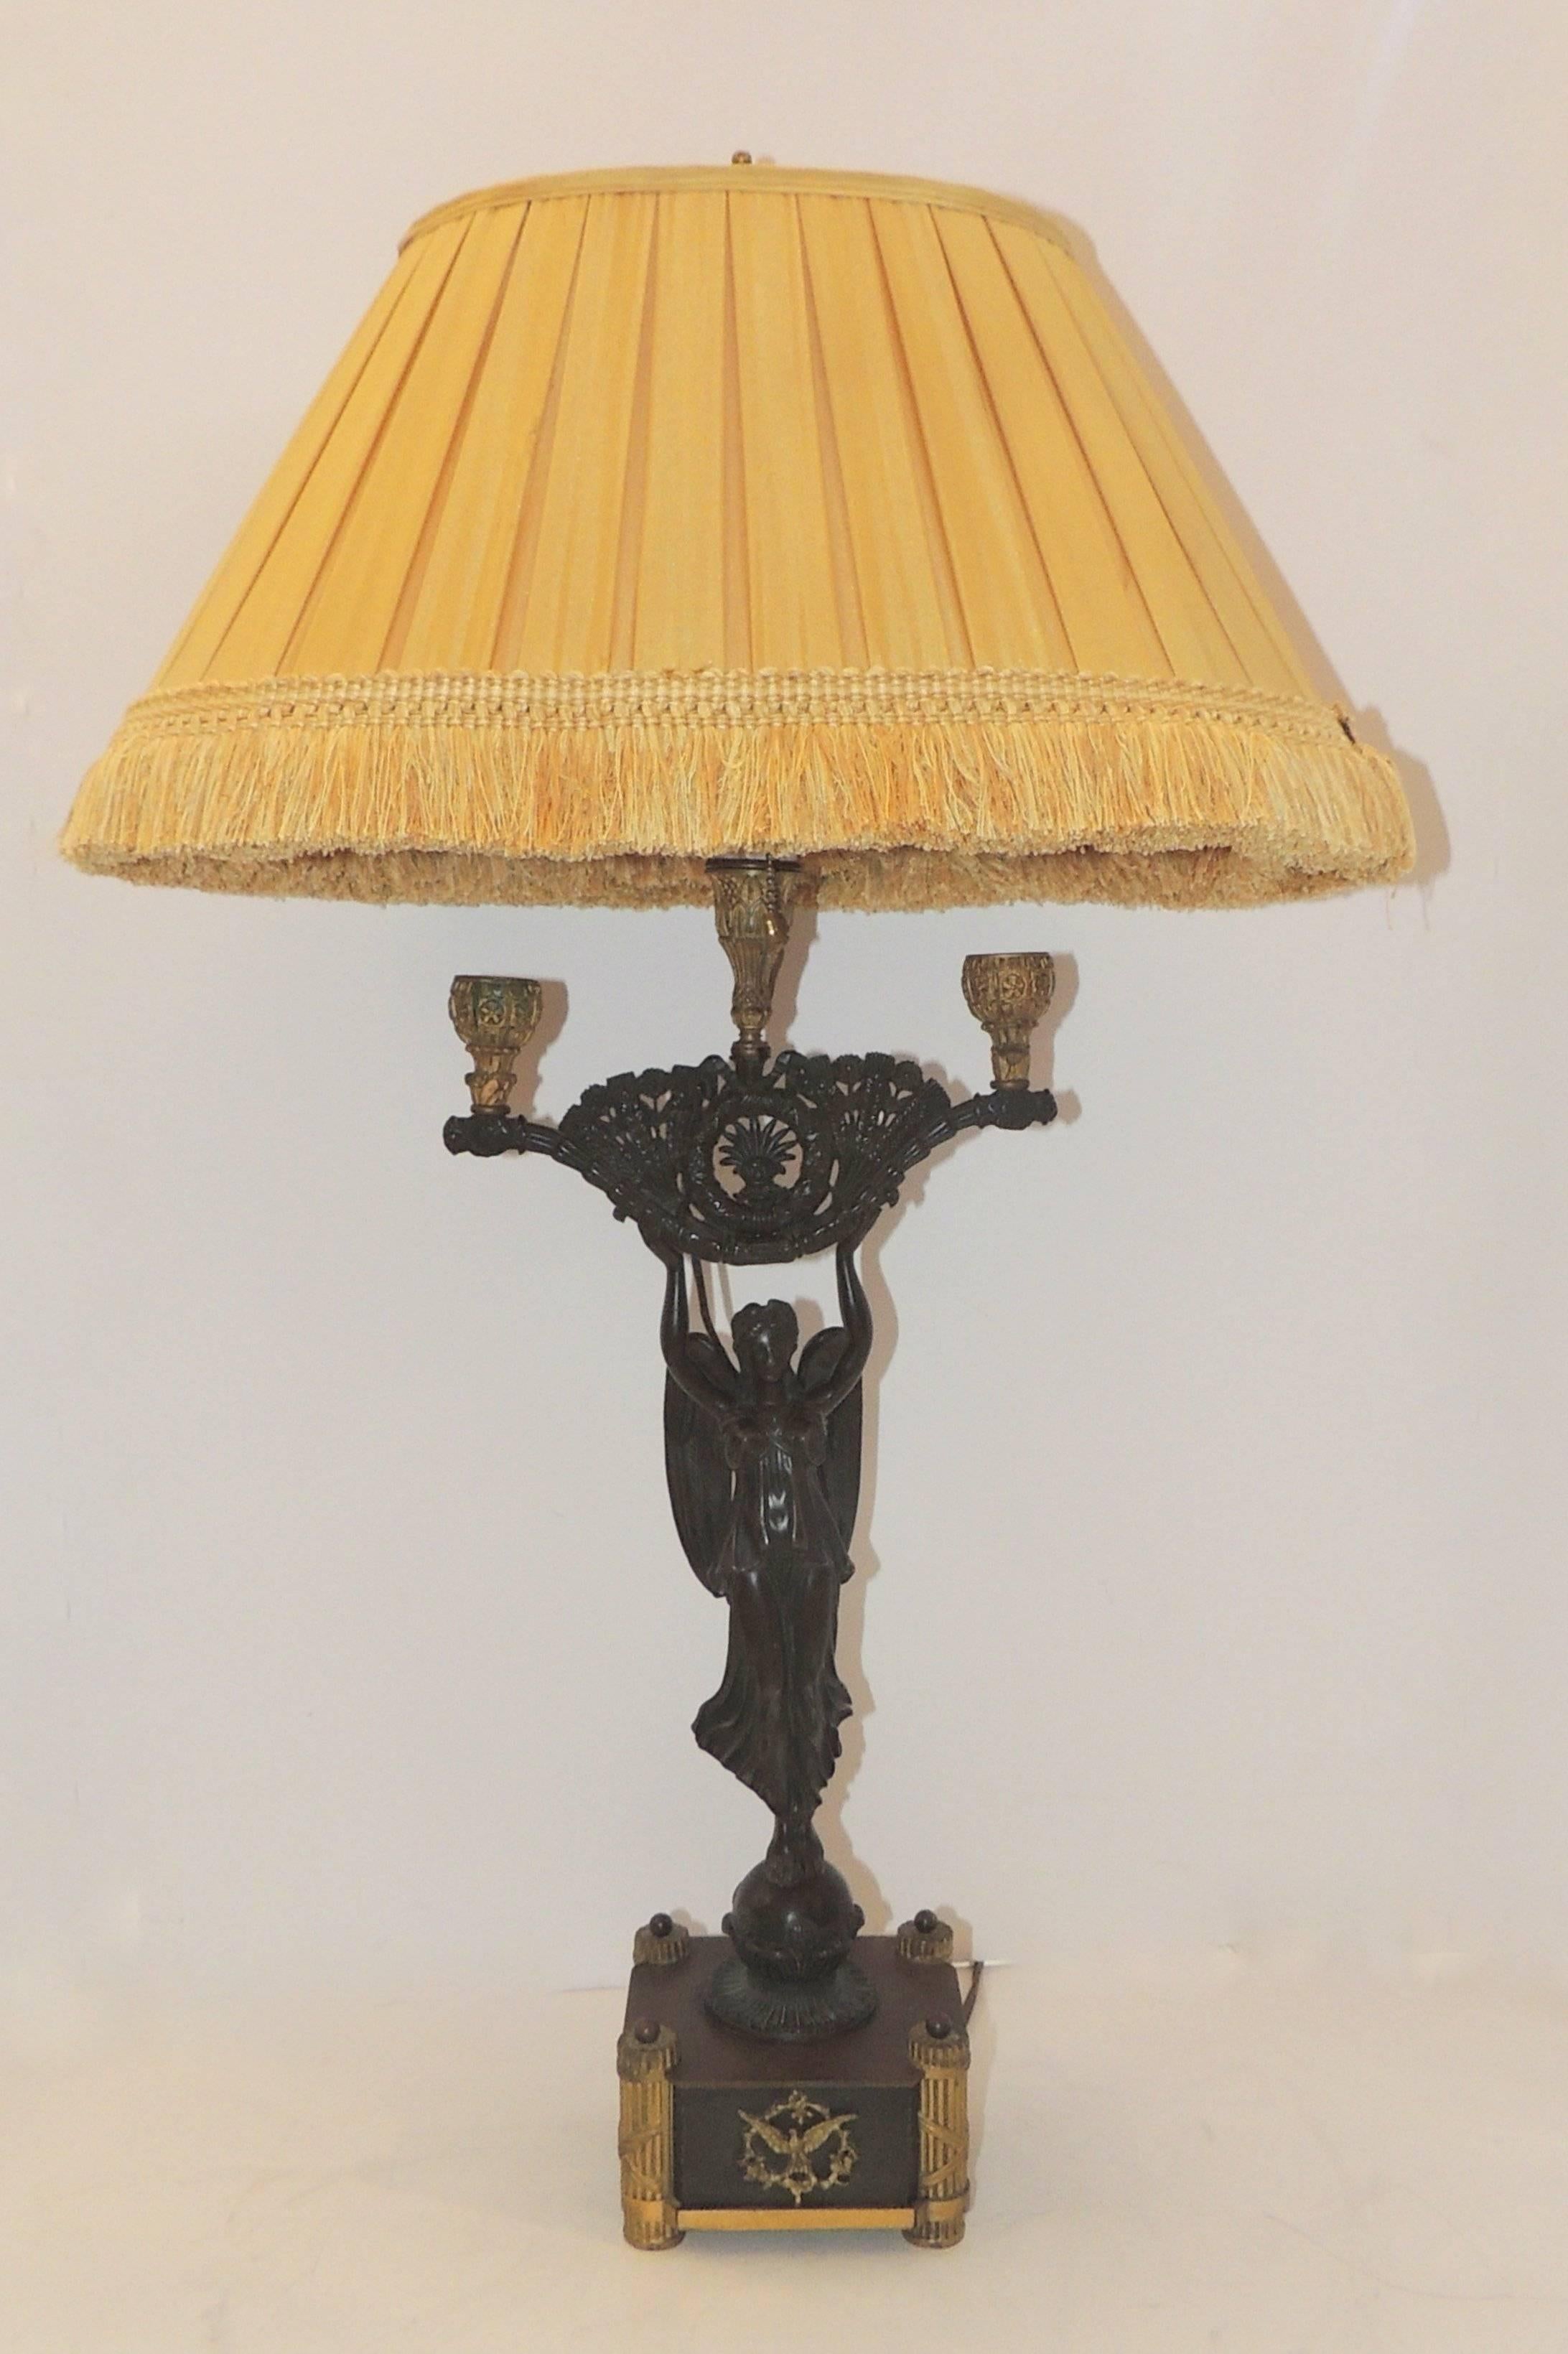 A wonderful French Empire neoclassical winged victory lady figure standing atop an orb set on a raised square bronze plinth, gilt and patinated bronze Regency lamp. Fantastic quality and detail.
Accompanied by a beautiful custom silk lampshade.
